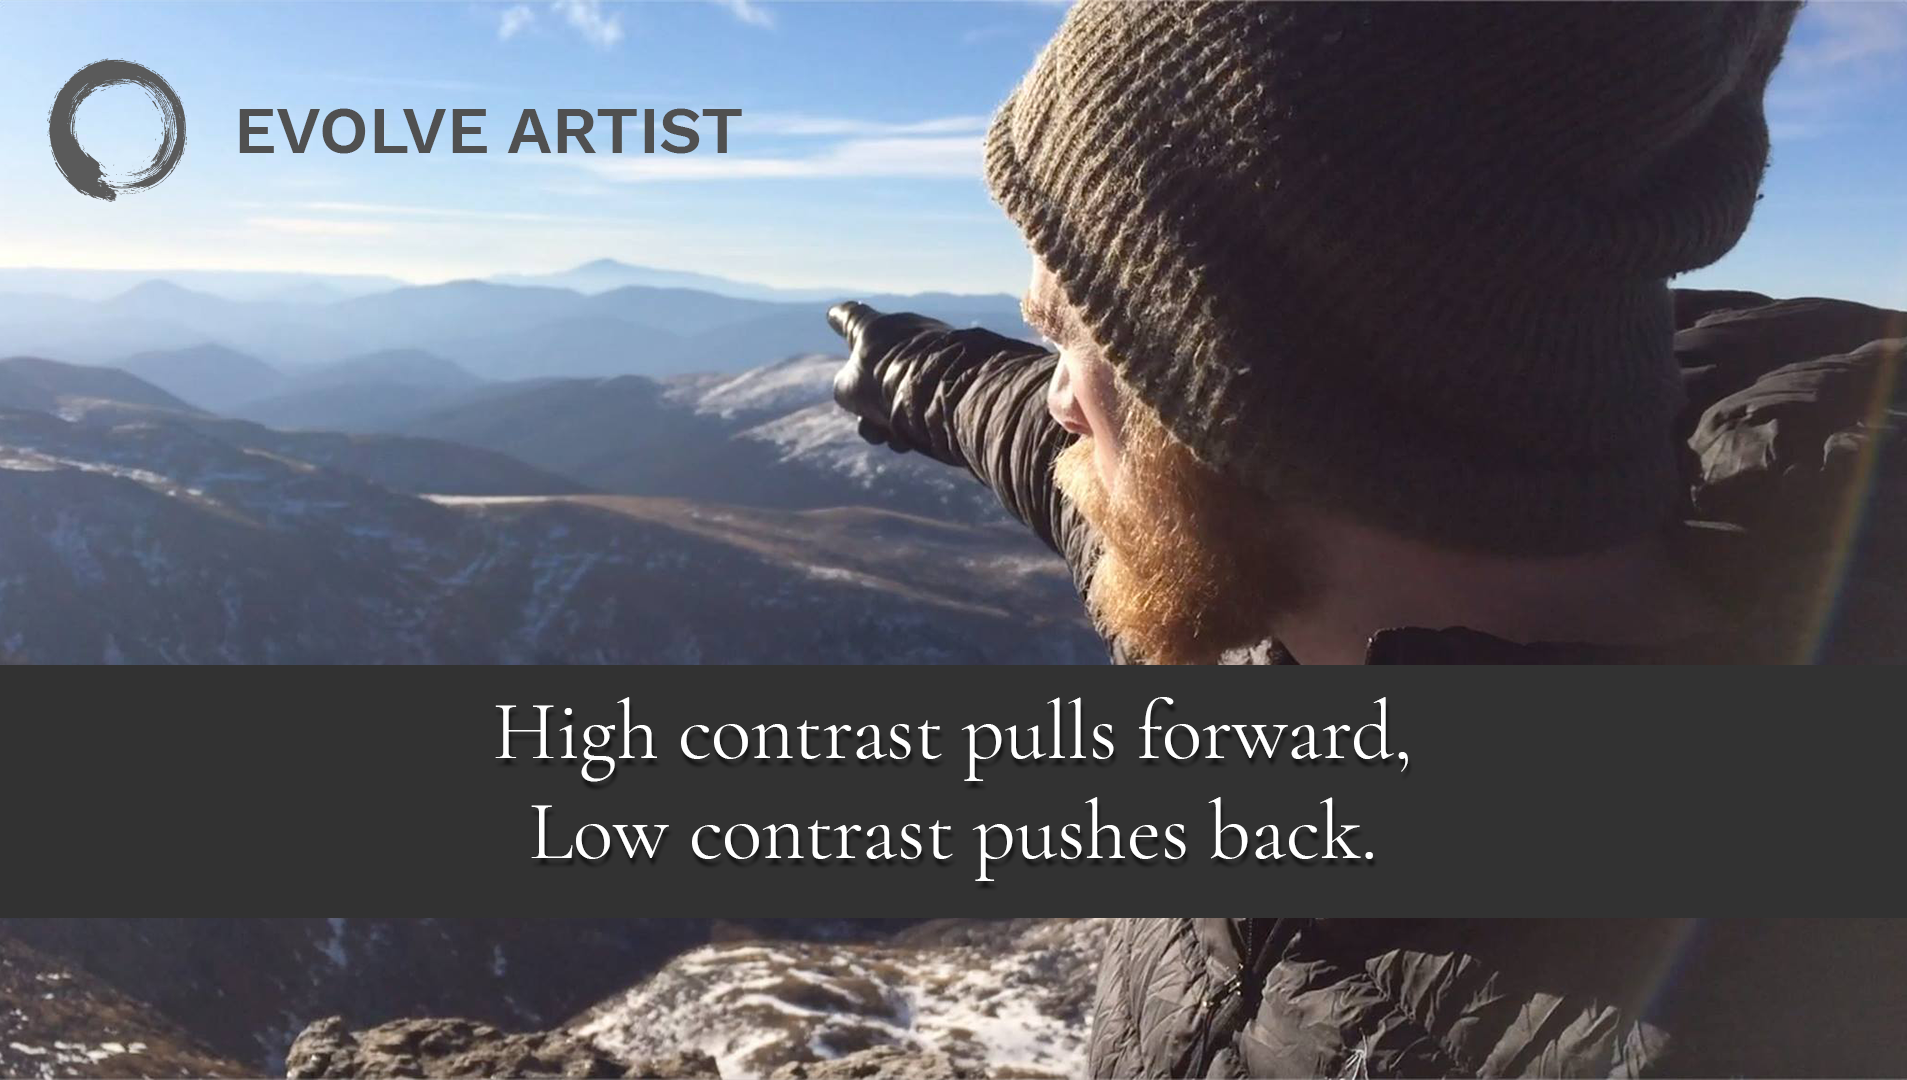 Photo shows that high contrast pulls forward and low contrast pushes back